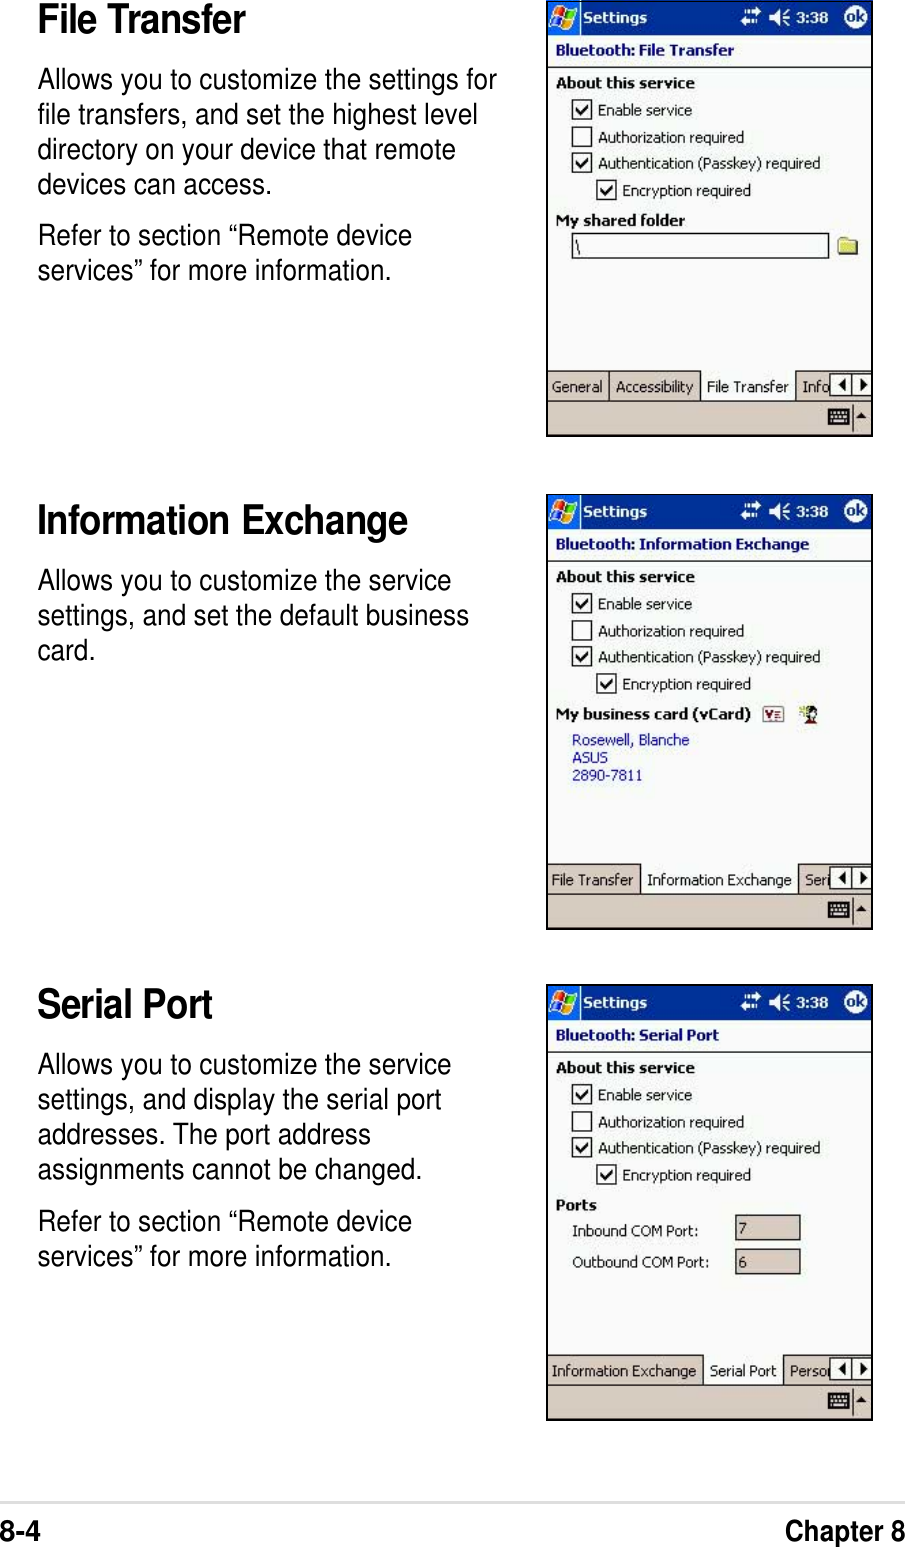 8-4Chapter 8File TransferAllows you to customize the settings forfile transfers, and set the highest leveldirectory on your device that remotedevices can access.Refer to section “Remote deviceservices” for more information.Information ExchangeAllows you to customize the servicesettings, and set the default businesscard.Serial PortAllows you to customize the servicesettings, and display the serial portaddresses. The port addressassignments cannot be changed.Refer to section “Remote deviceservices” for more information.